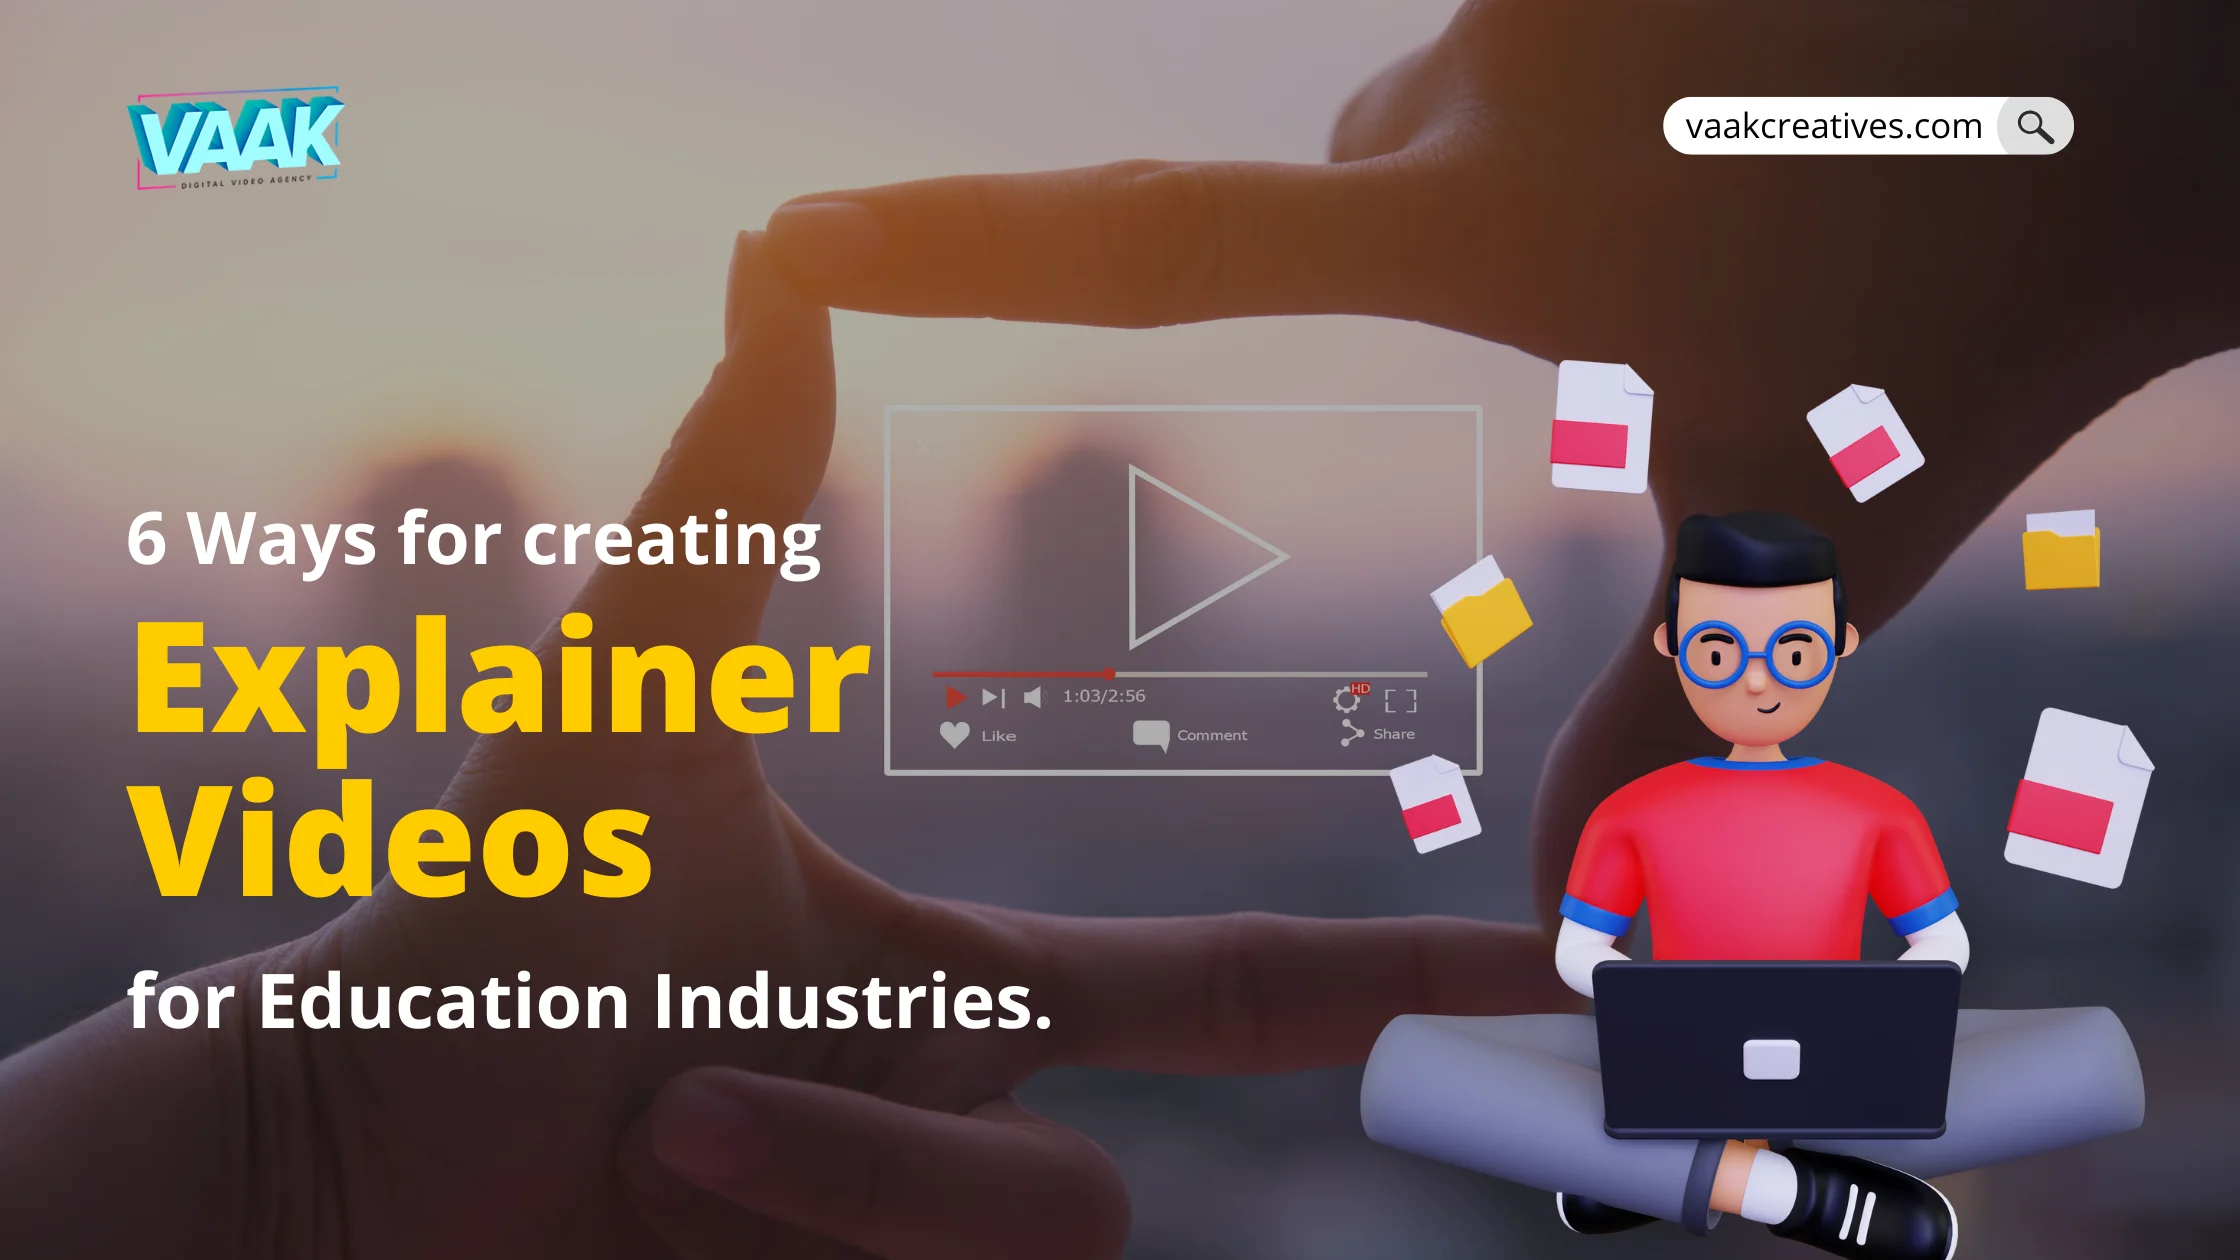 blog/6_Ways_for_Creating_Explainer_Videos_for_the_Education_Industry_Image_26tEjpp.webp